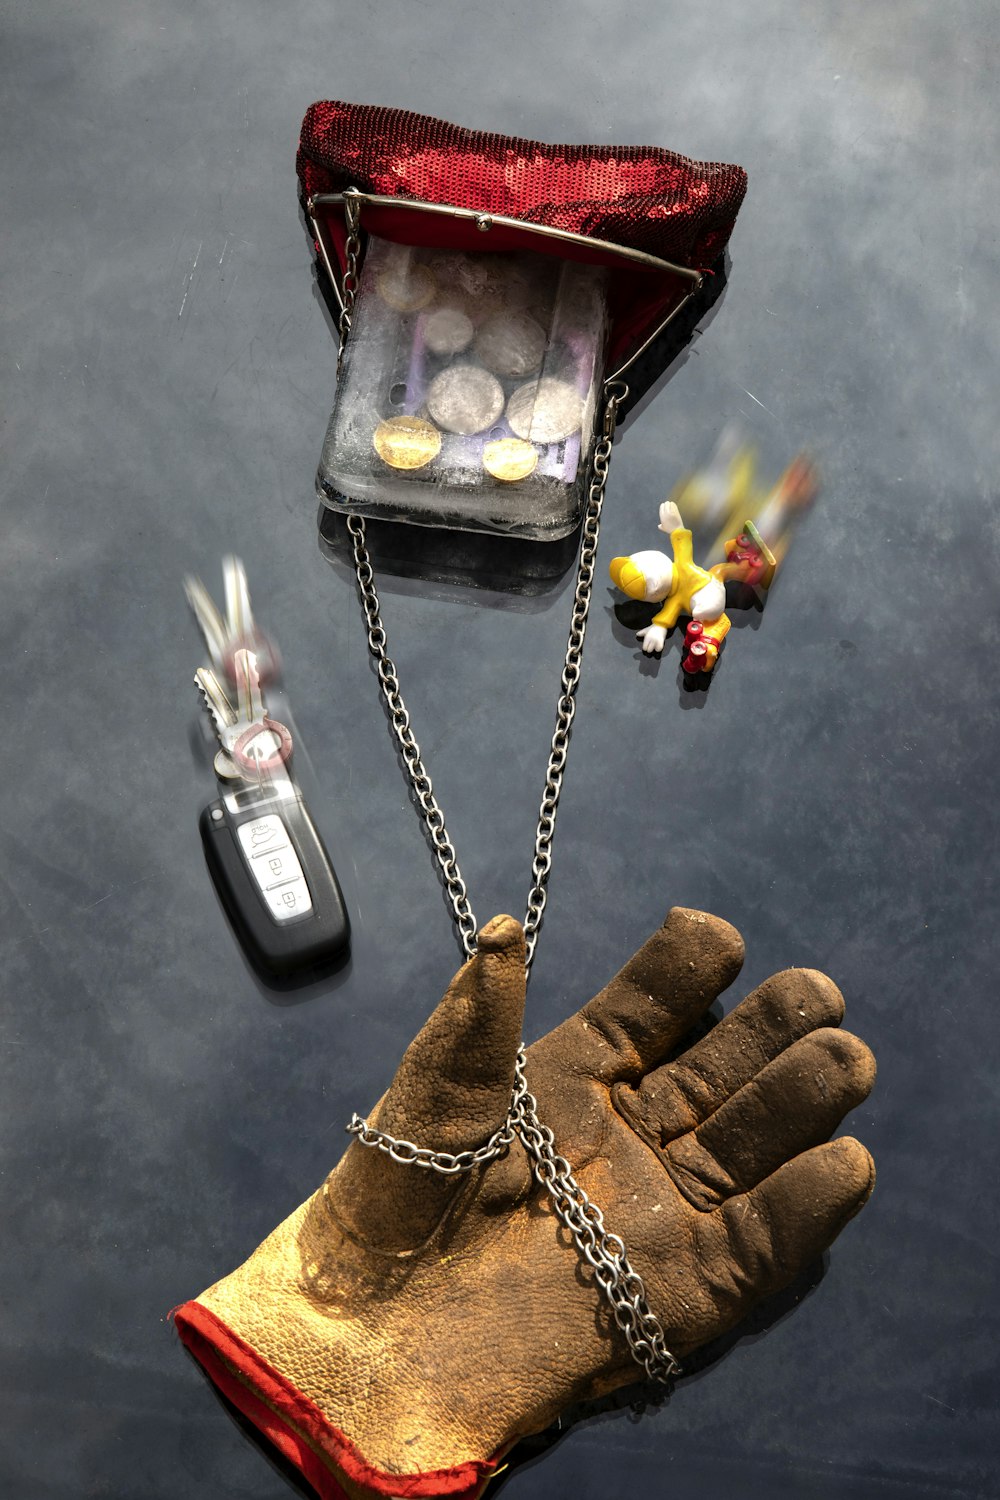 a glove with a chain attached to it next to a bag of pills